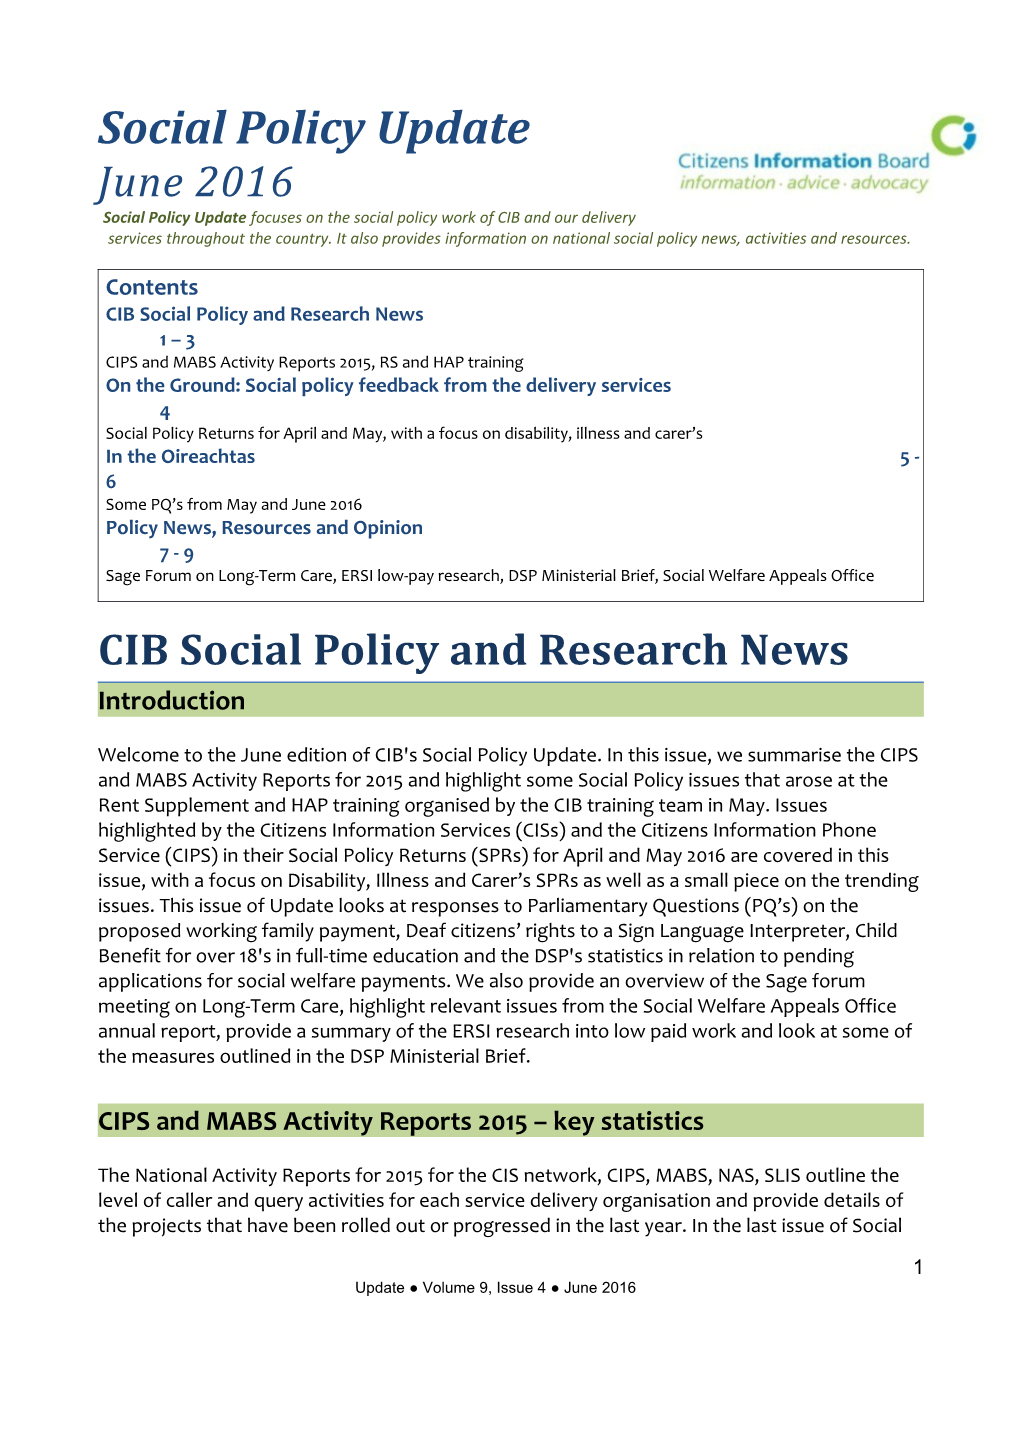 CIPS and MABS Activity Reports 2015, RS and HAP Training